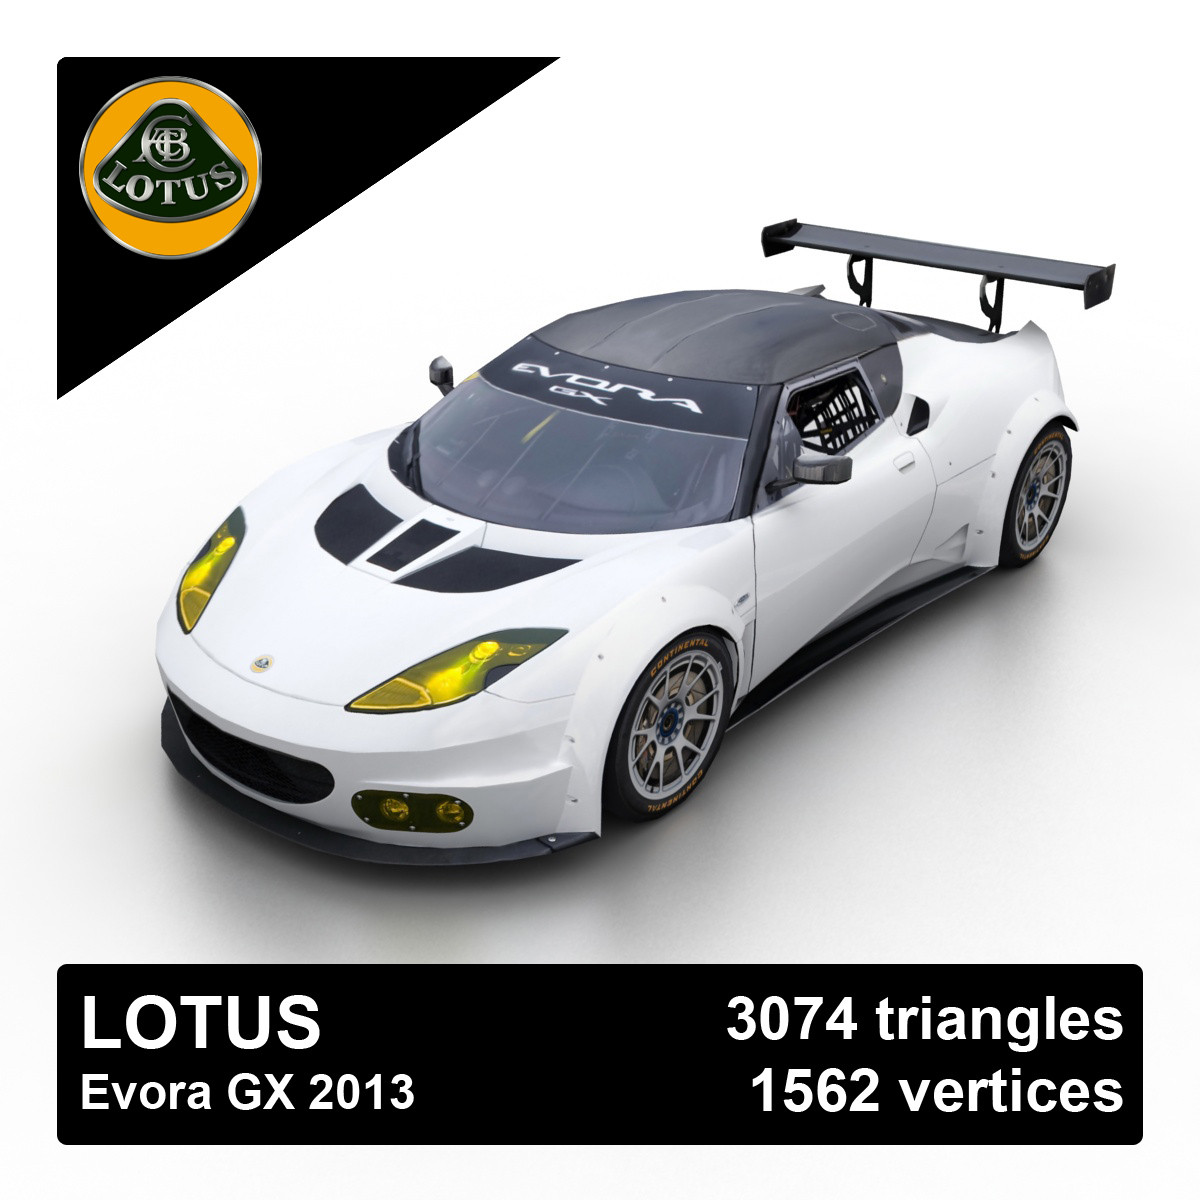 Amazing Lotus Evora Gx Pictures & Backgrounds